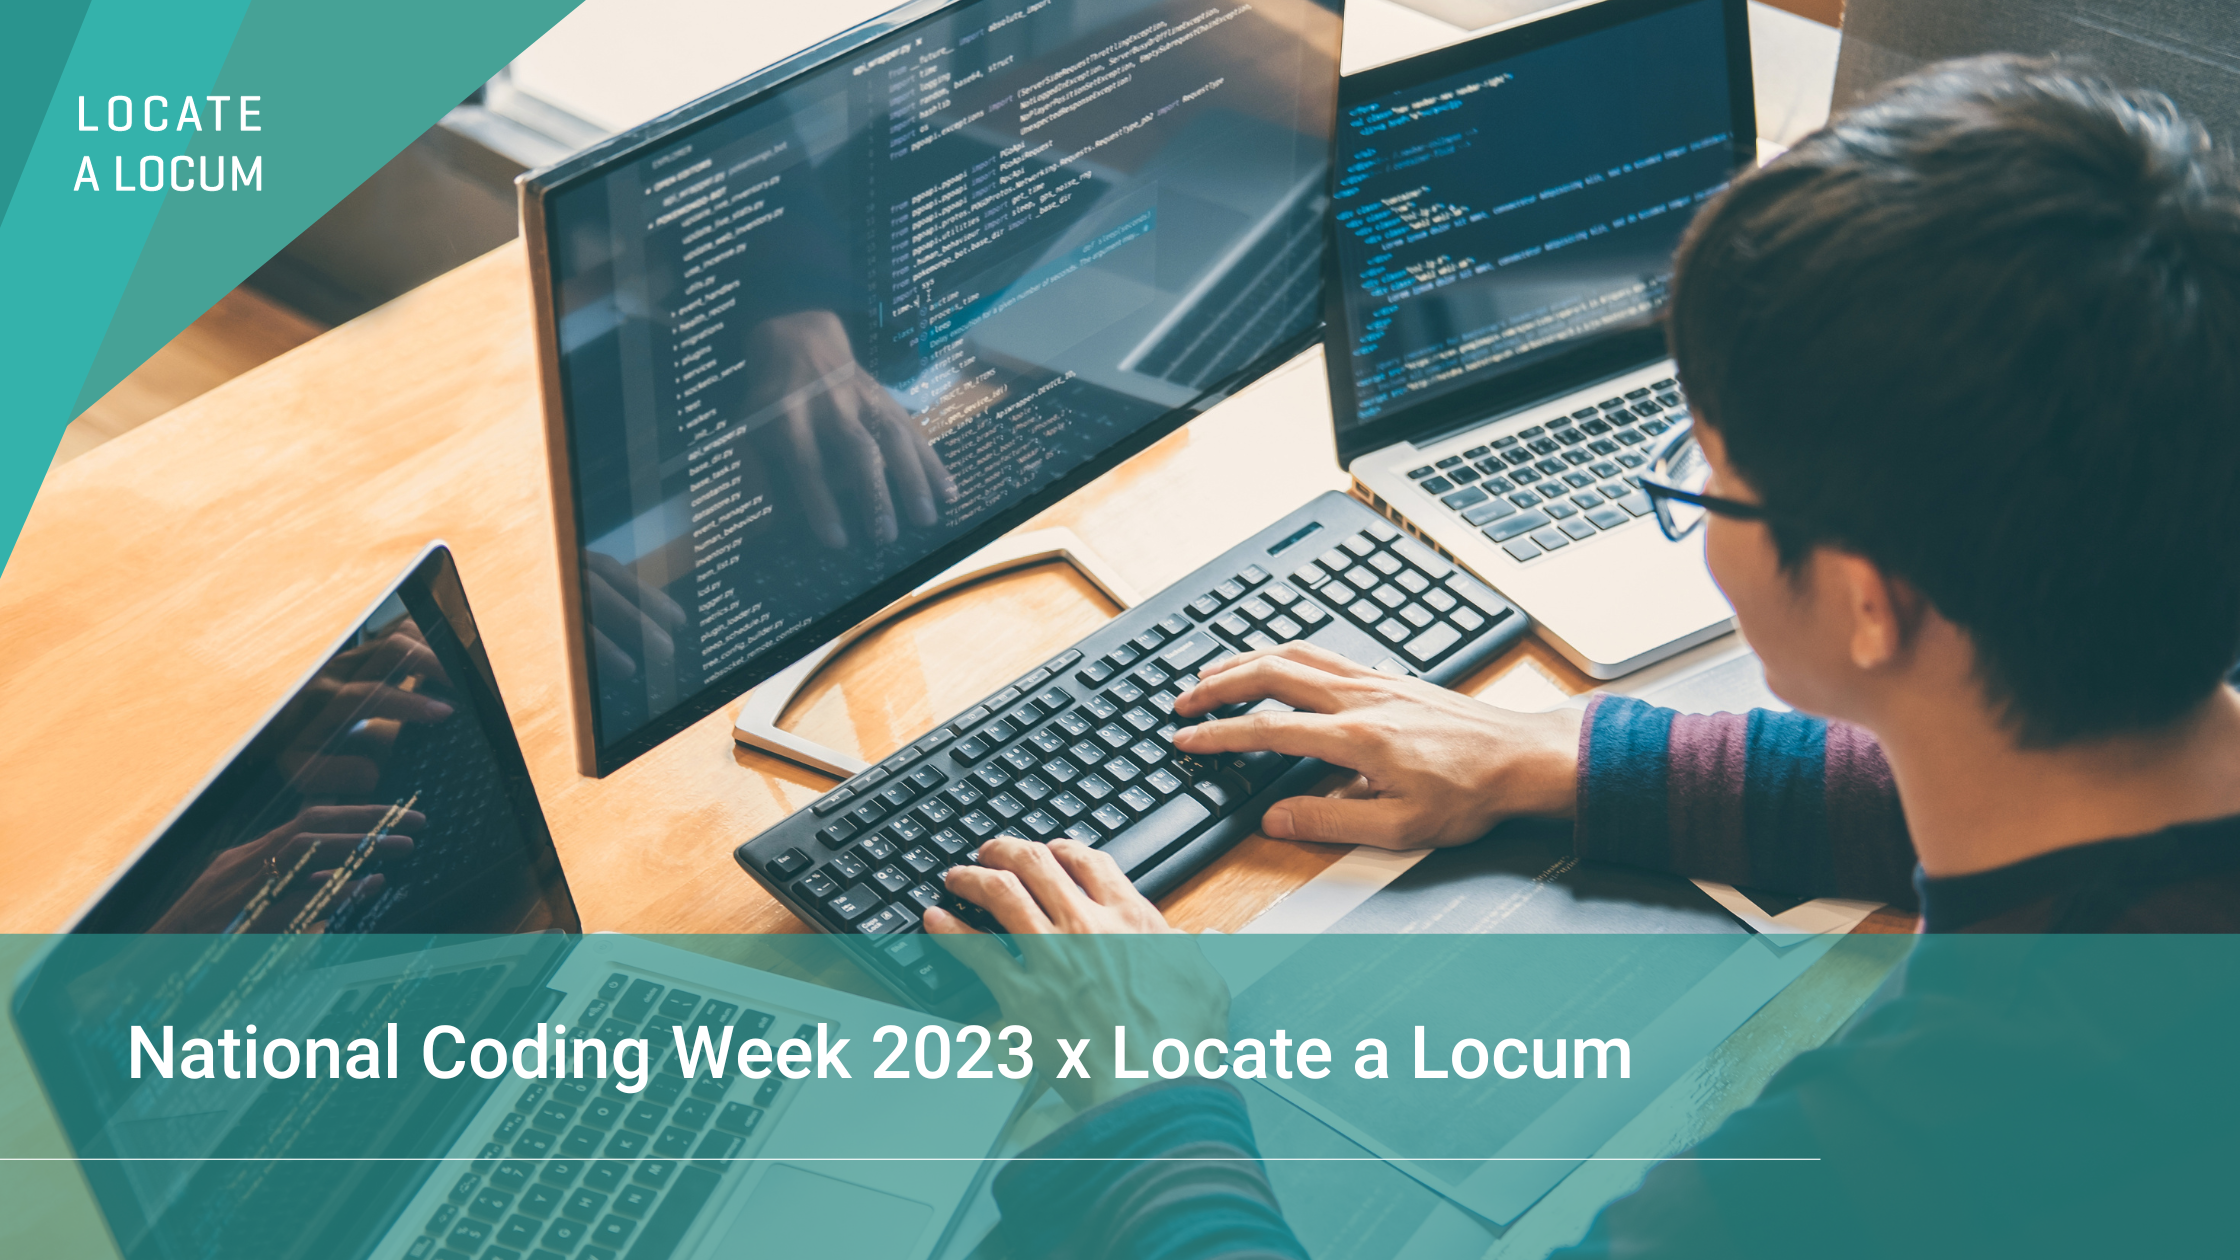 National Coding Week 2023 - Hear from Locate a Locum's developers